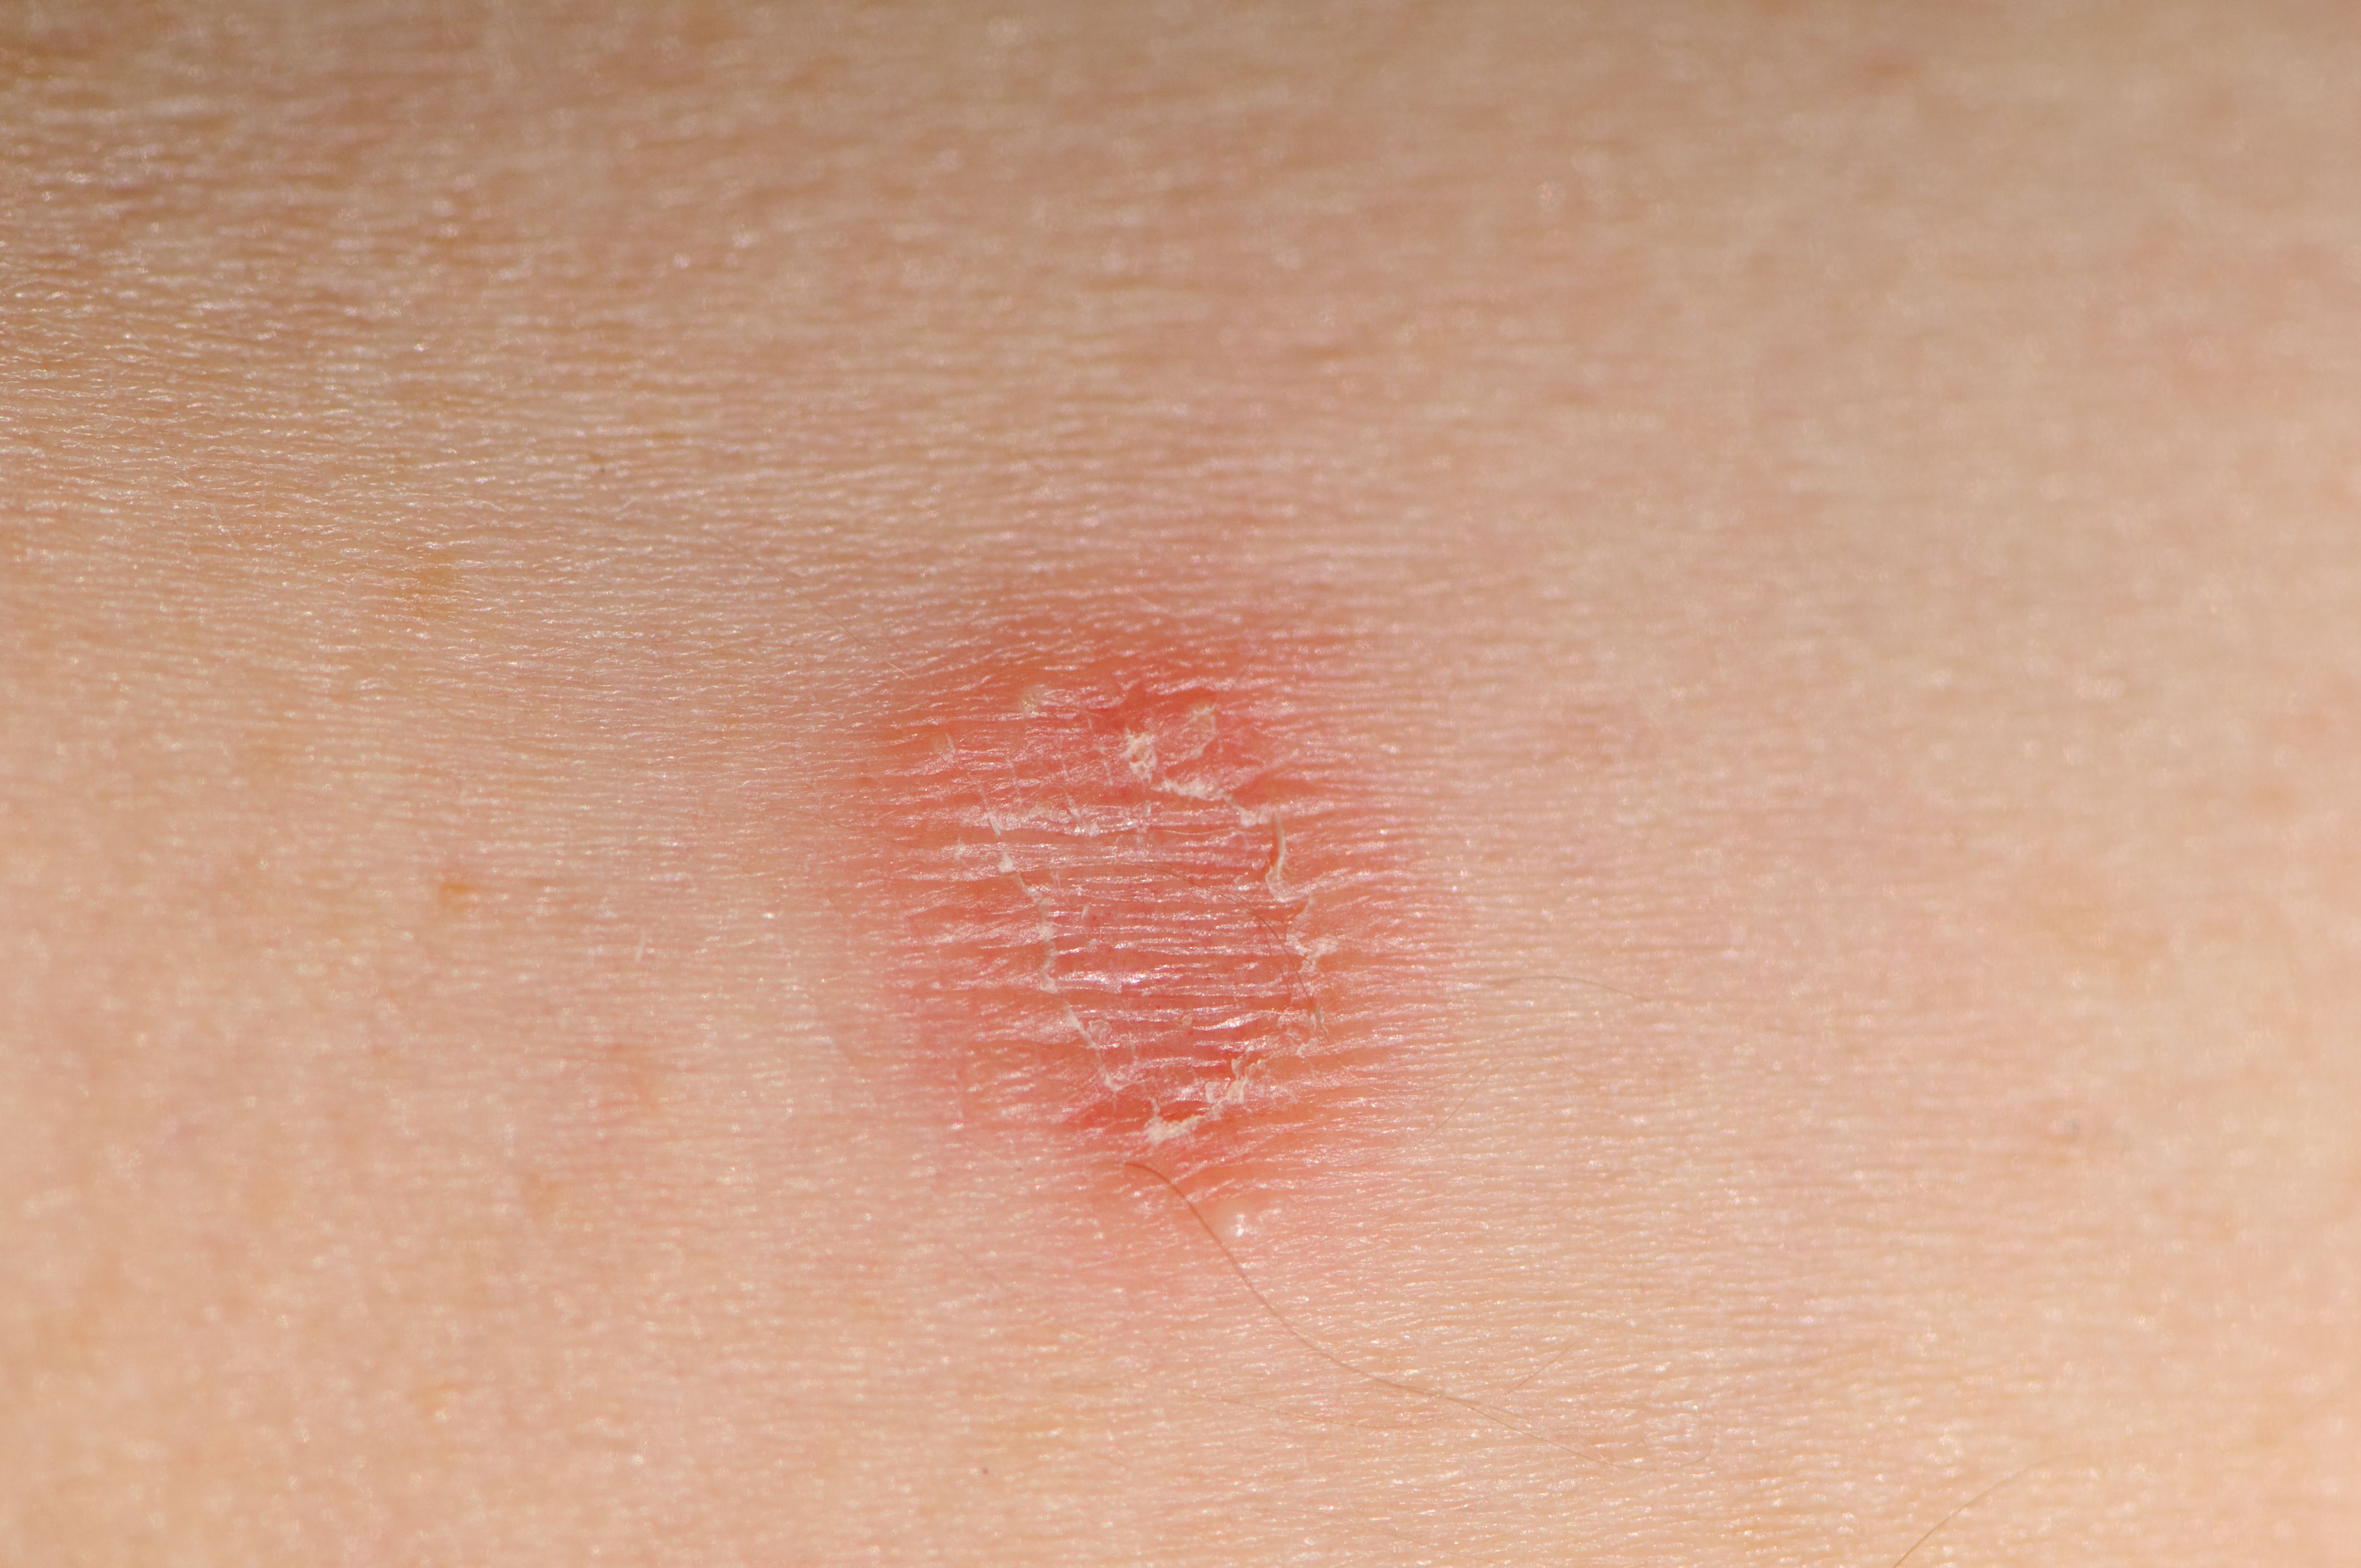 How Would I Know If I Have Ringworm?